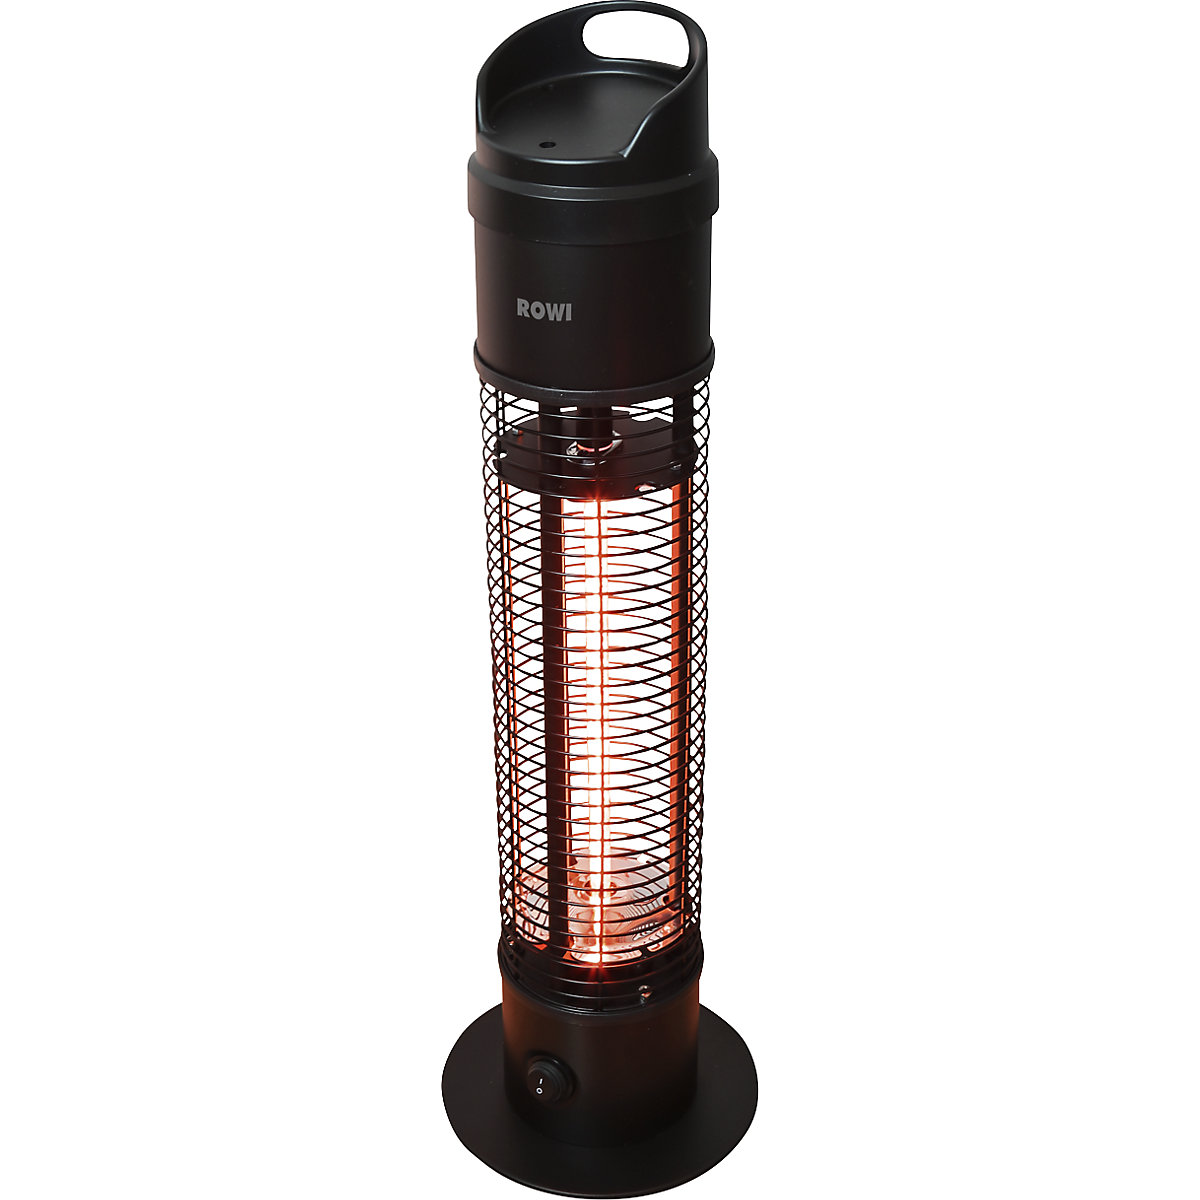 Infrared under-table radiant heater